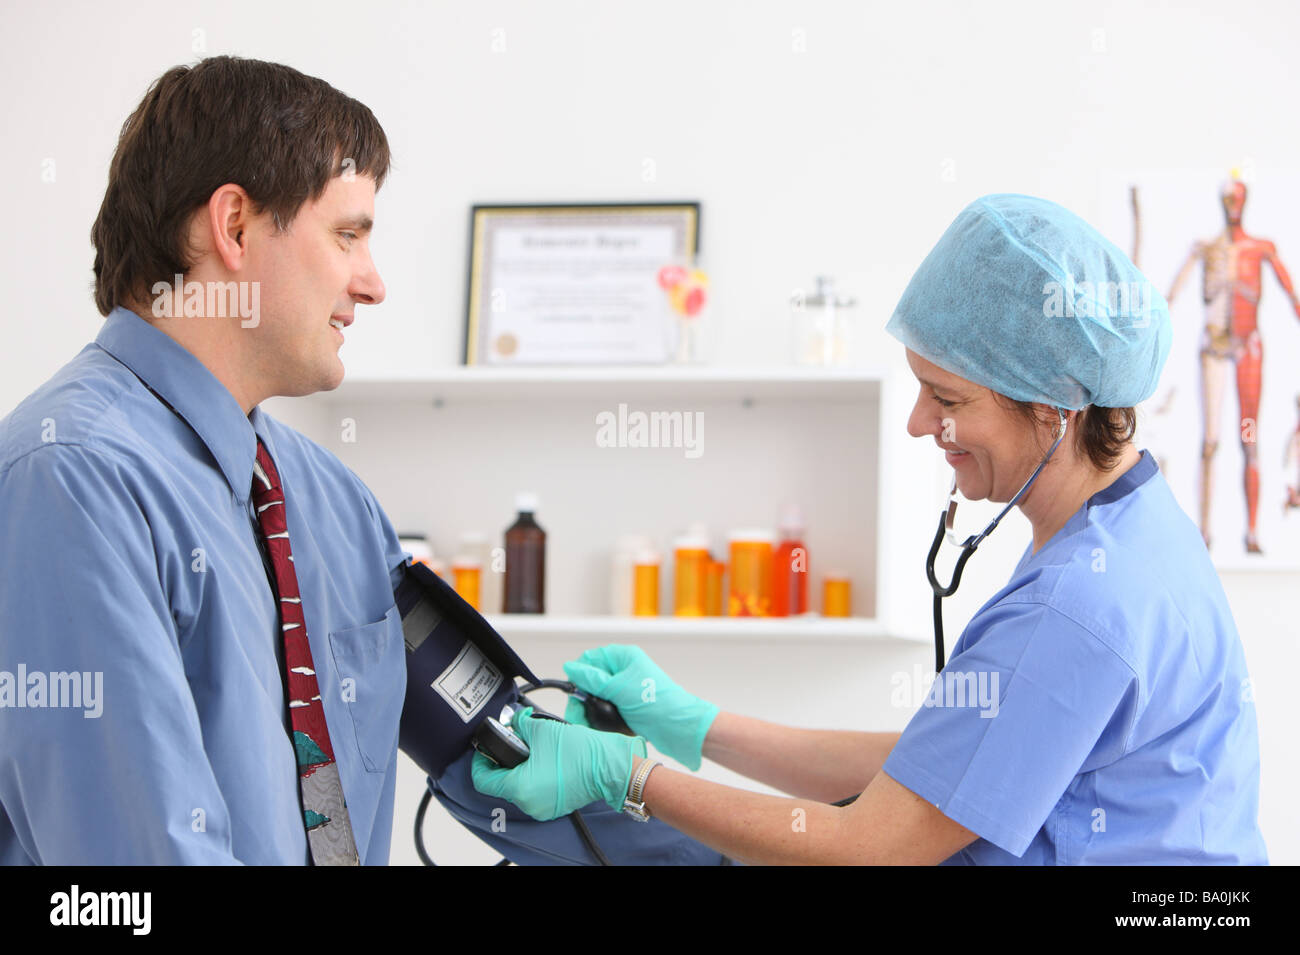 Man getting blood pressure taken at doctors office Stock Photo